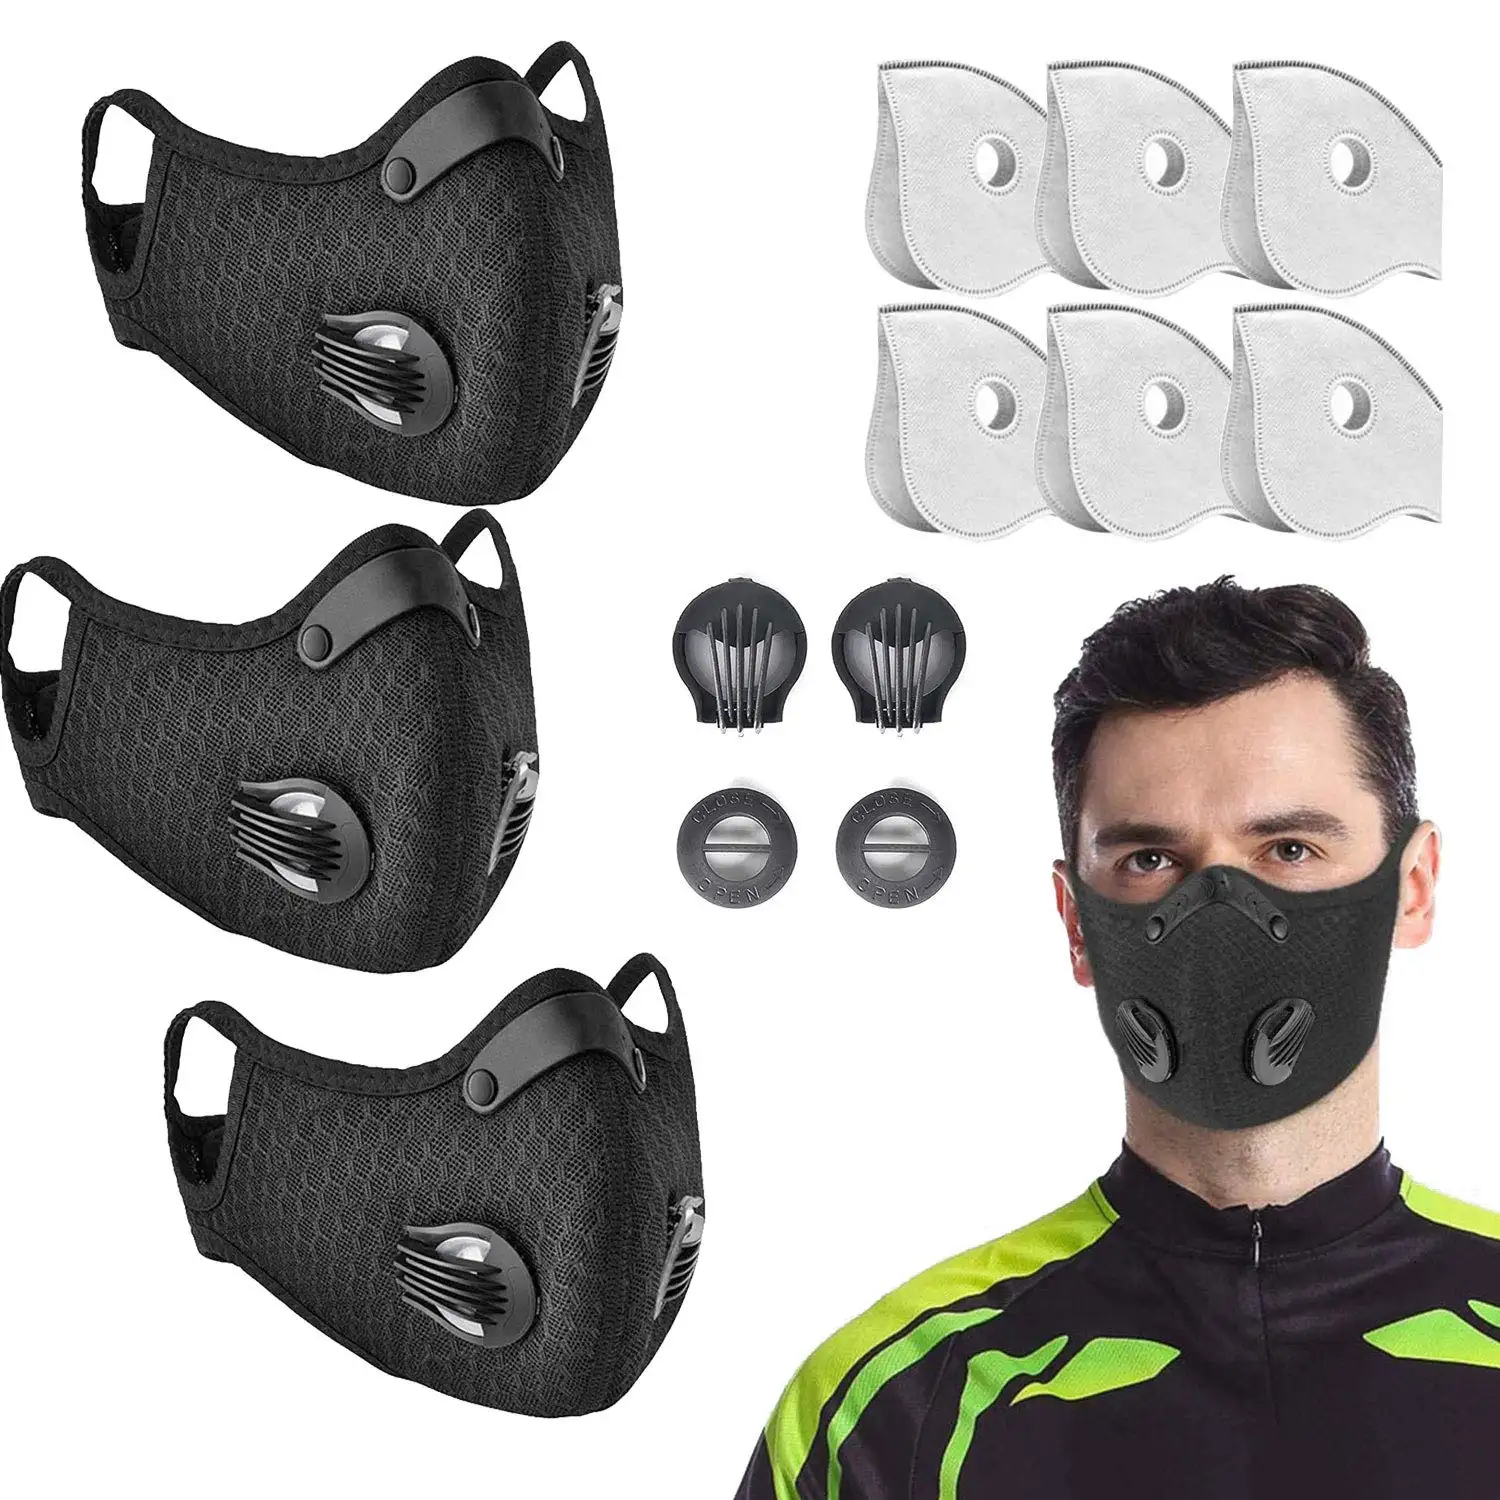 Custom Reusable Adjustable Masque Breathing Sports Face Cover Protective Pollution Facemask with Filter